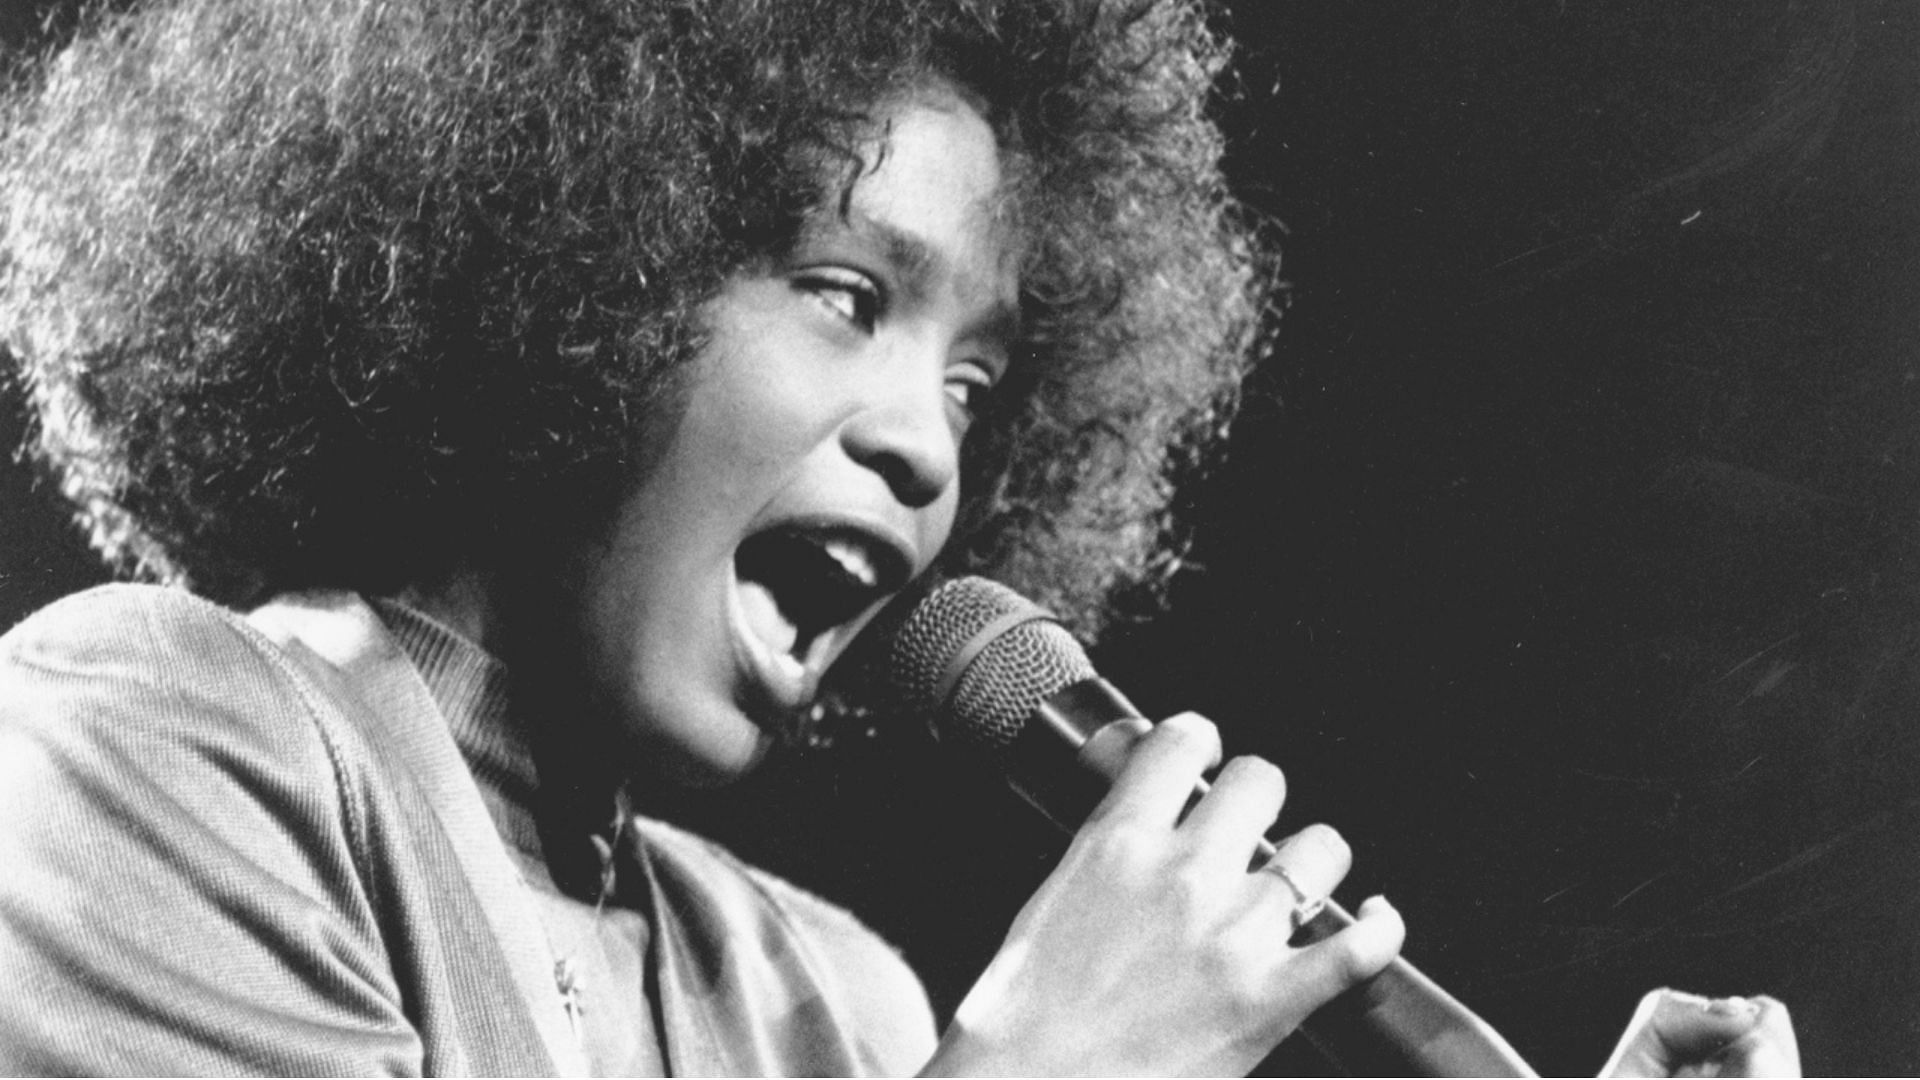 Whitney Houston Special is coming up soon (Image via CBS News)